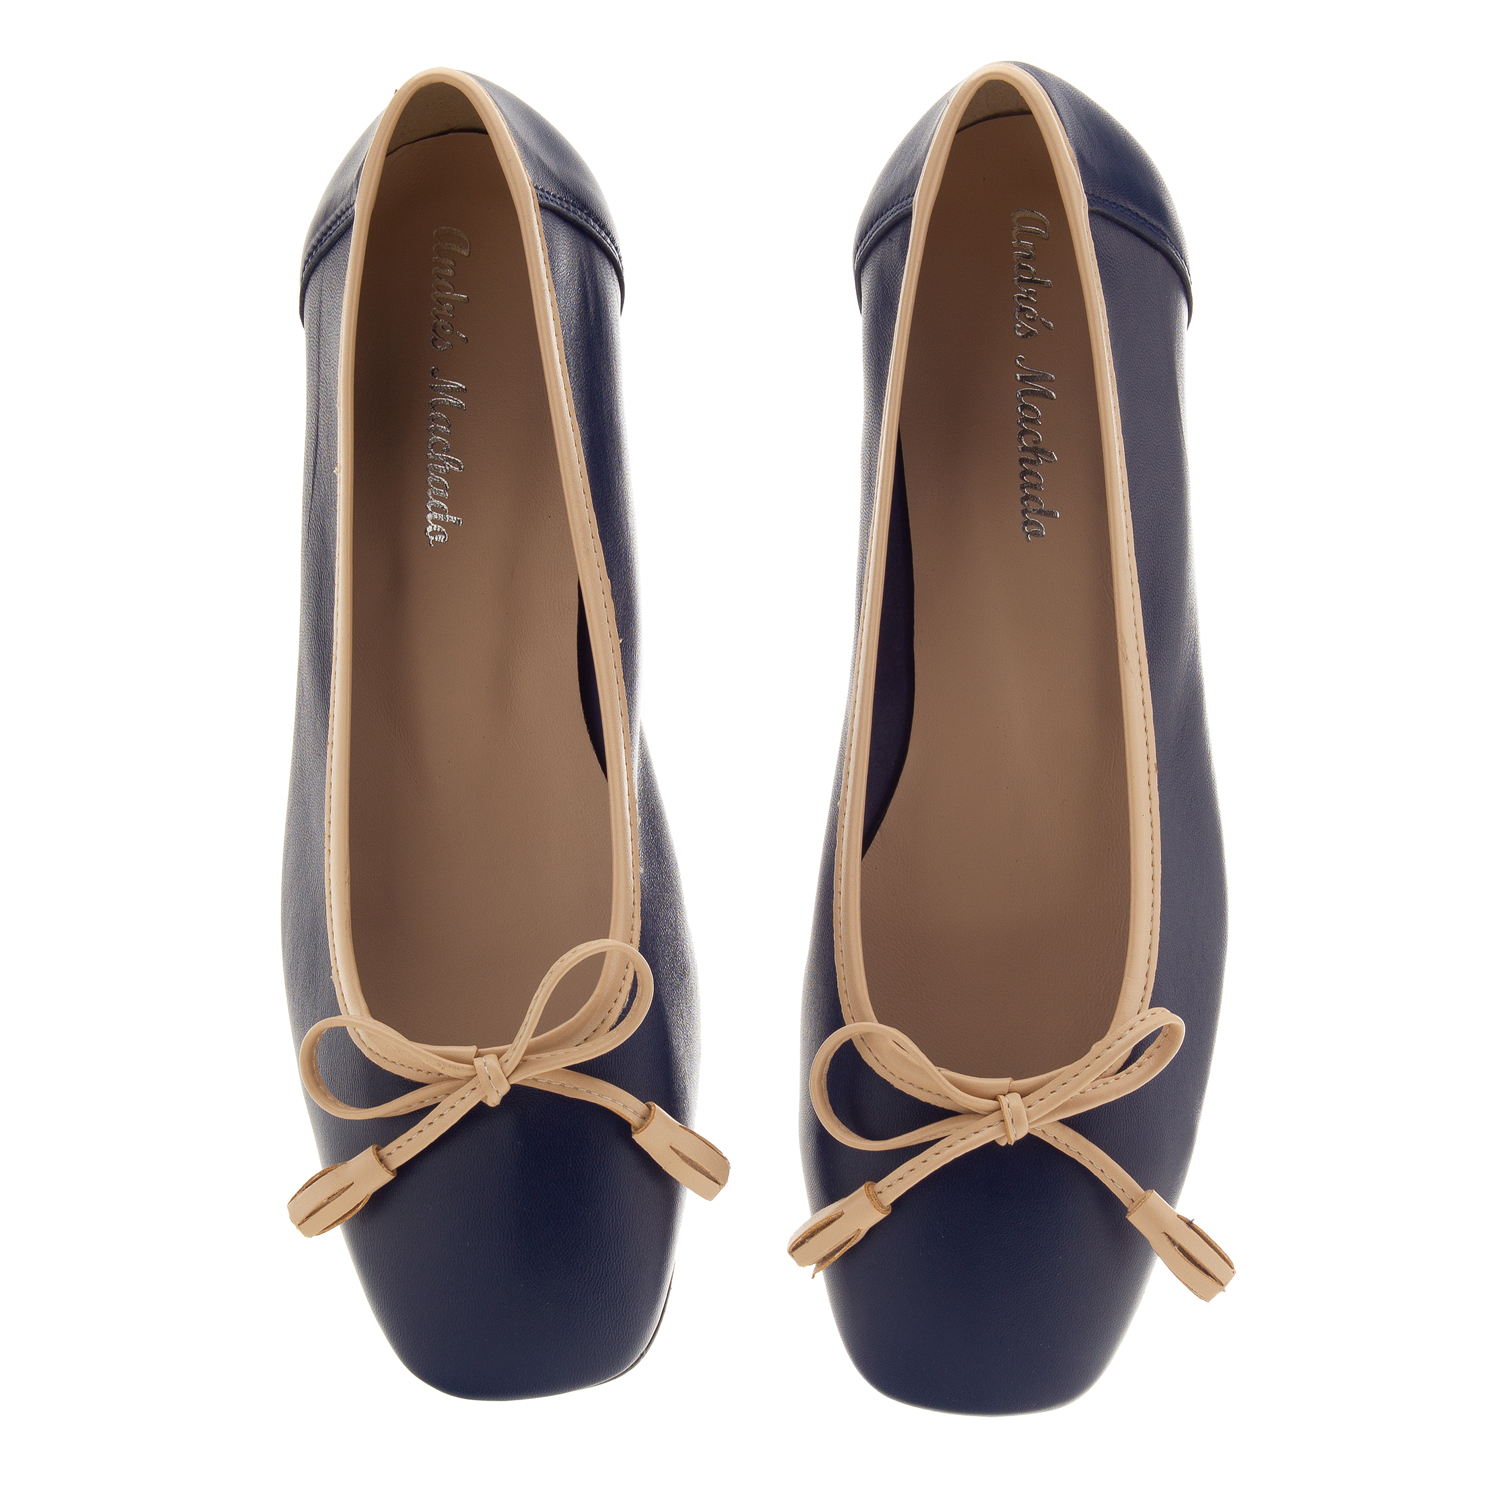 Bow Ballet Flats in Navy Leather 